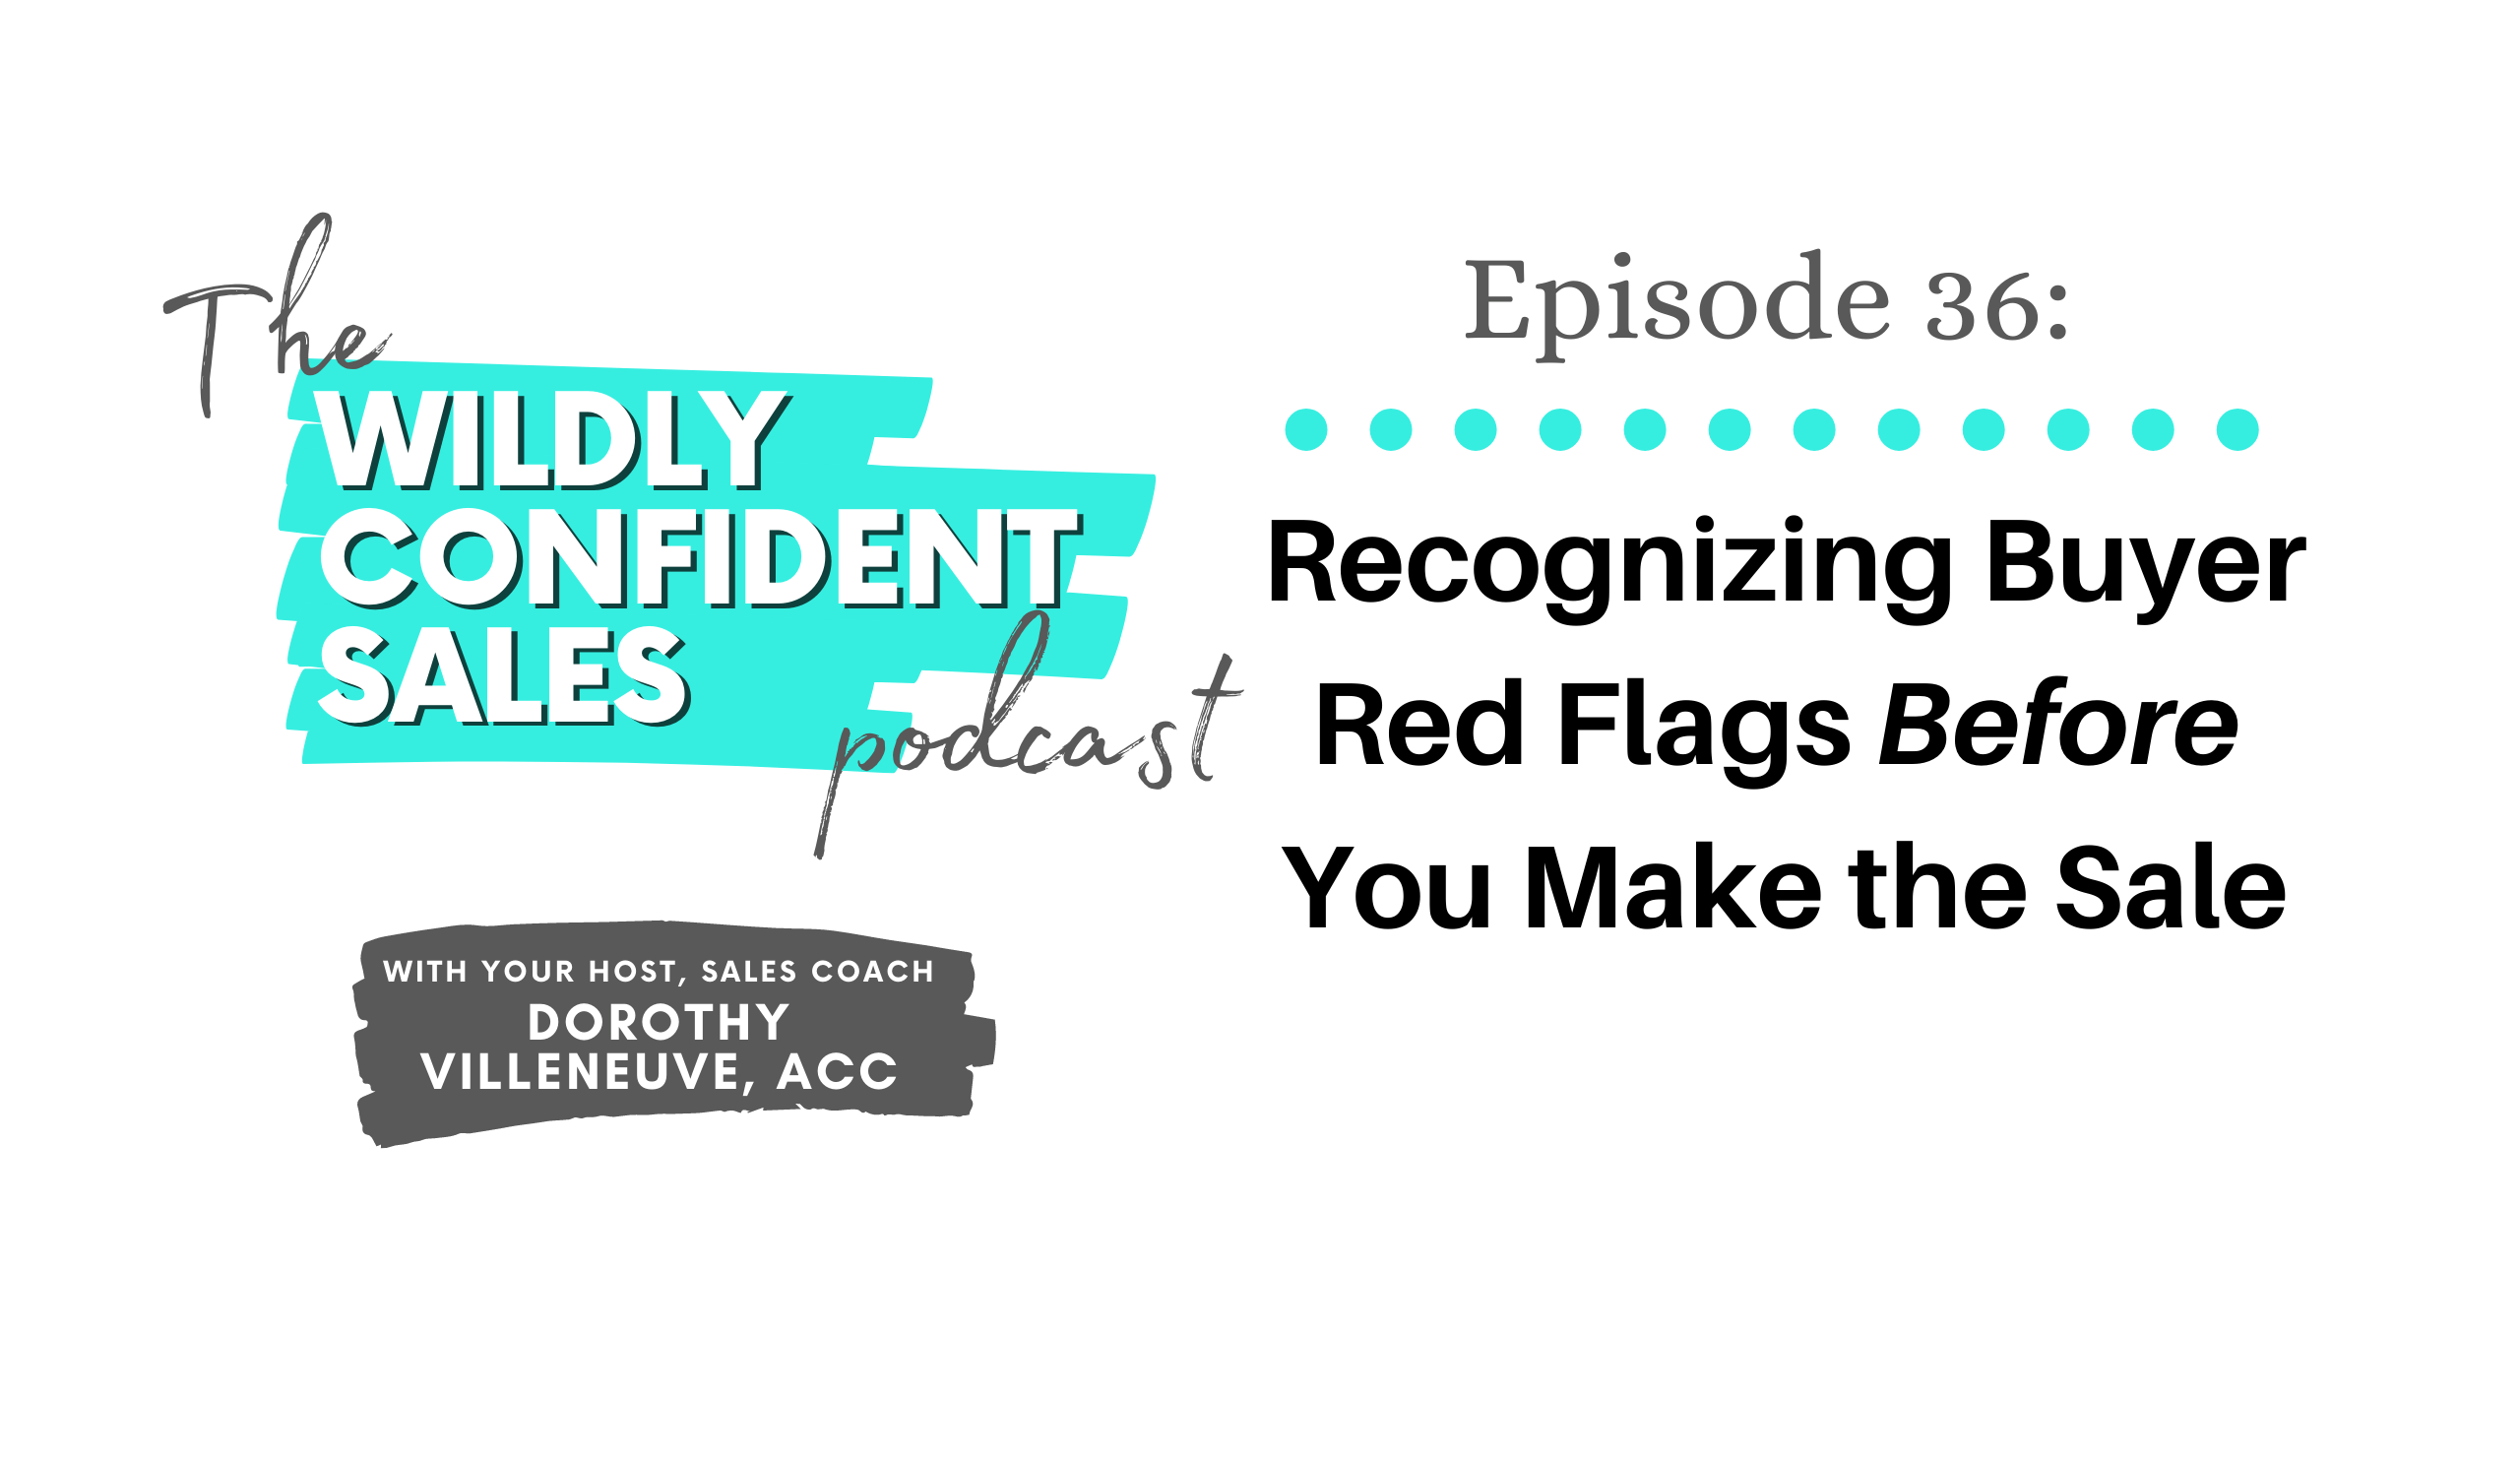 Recognizing Buyer Red Flags Before You Make the Sale